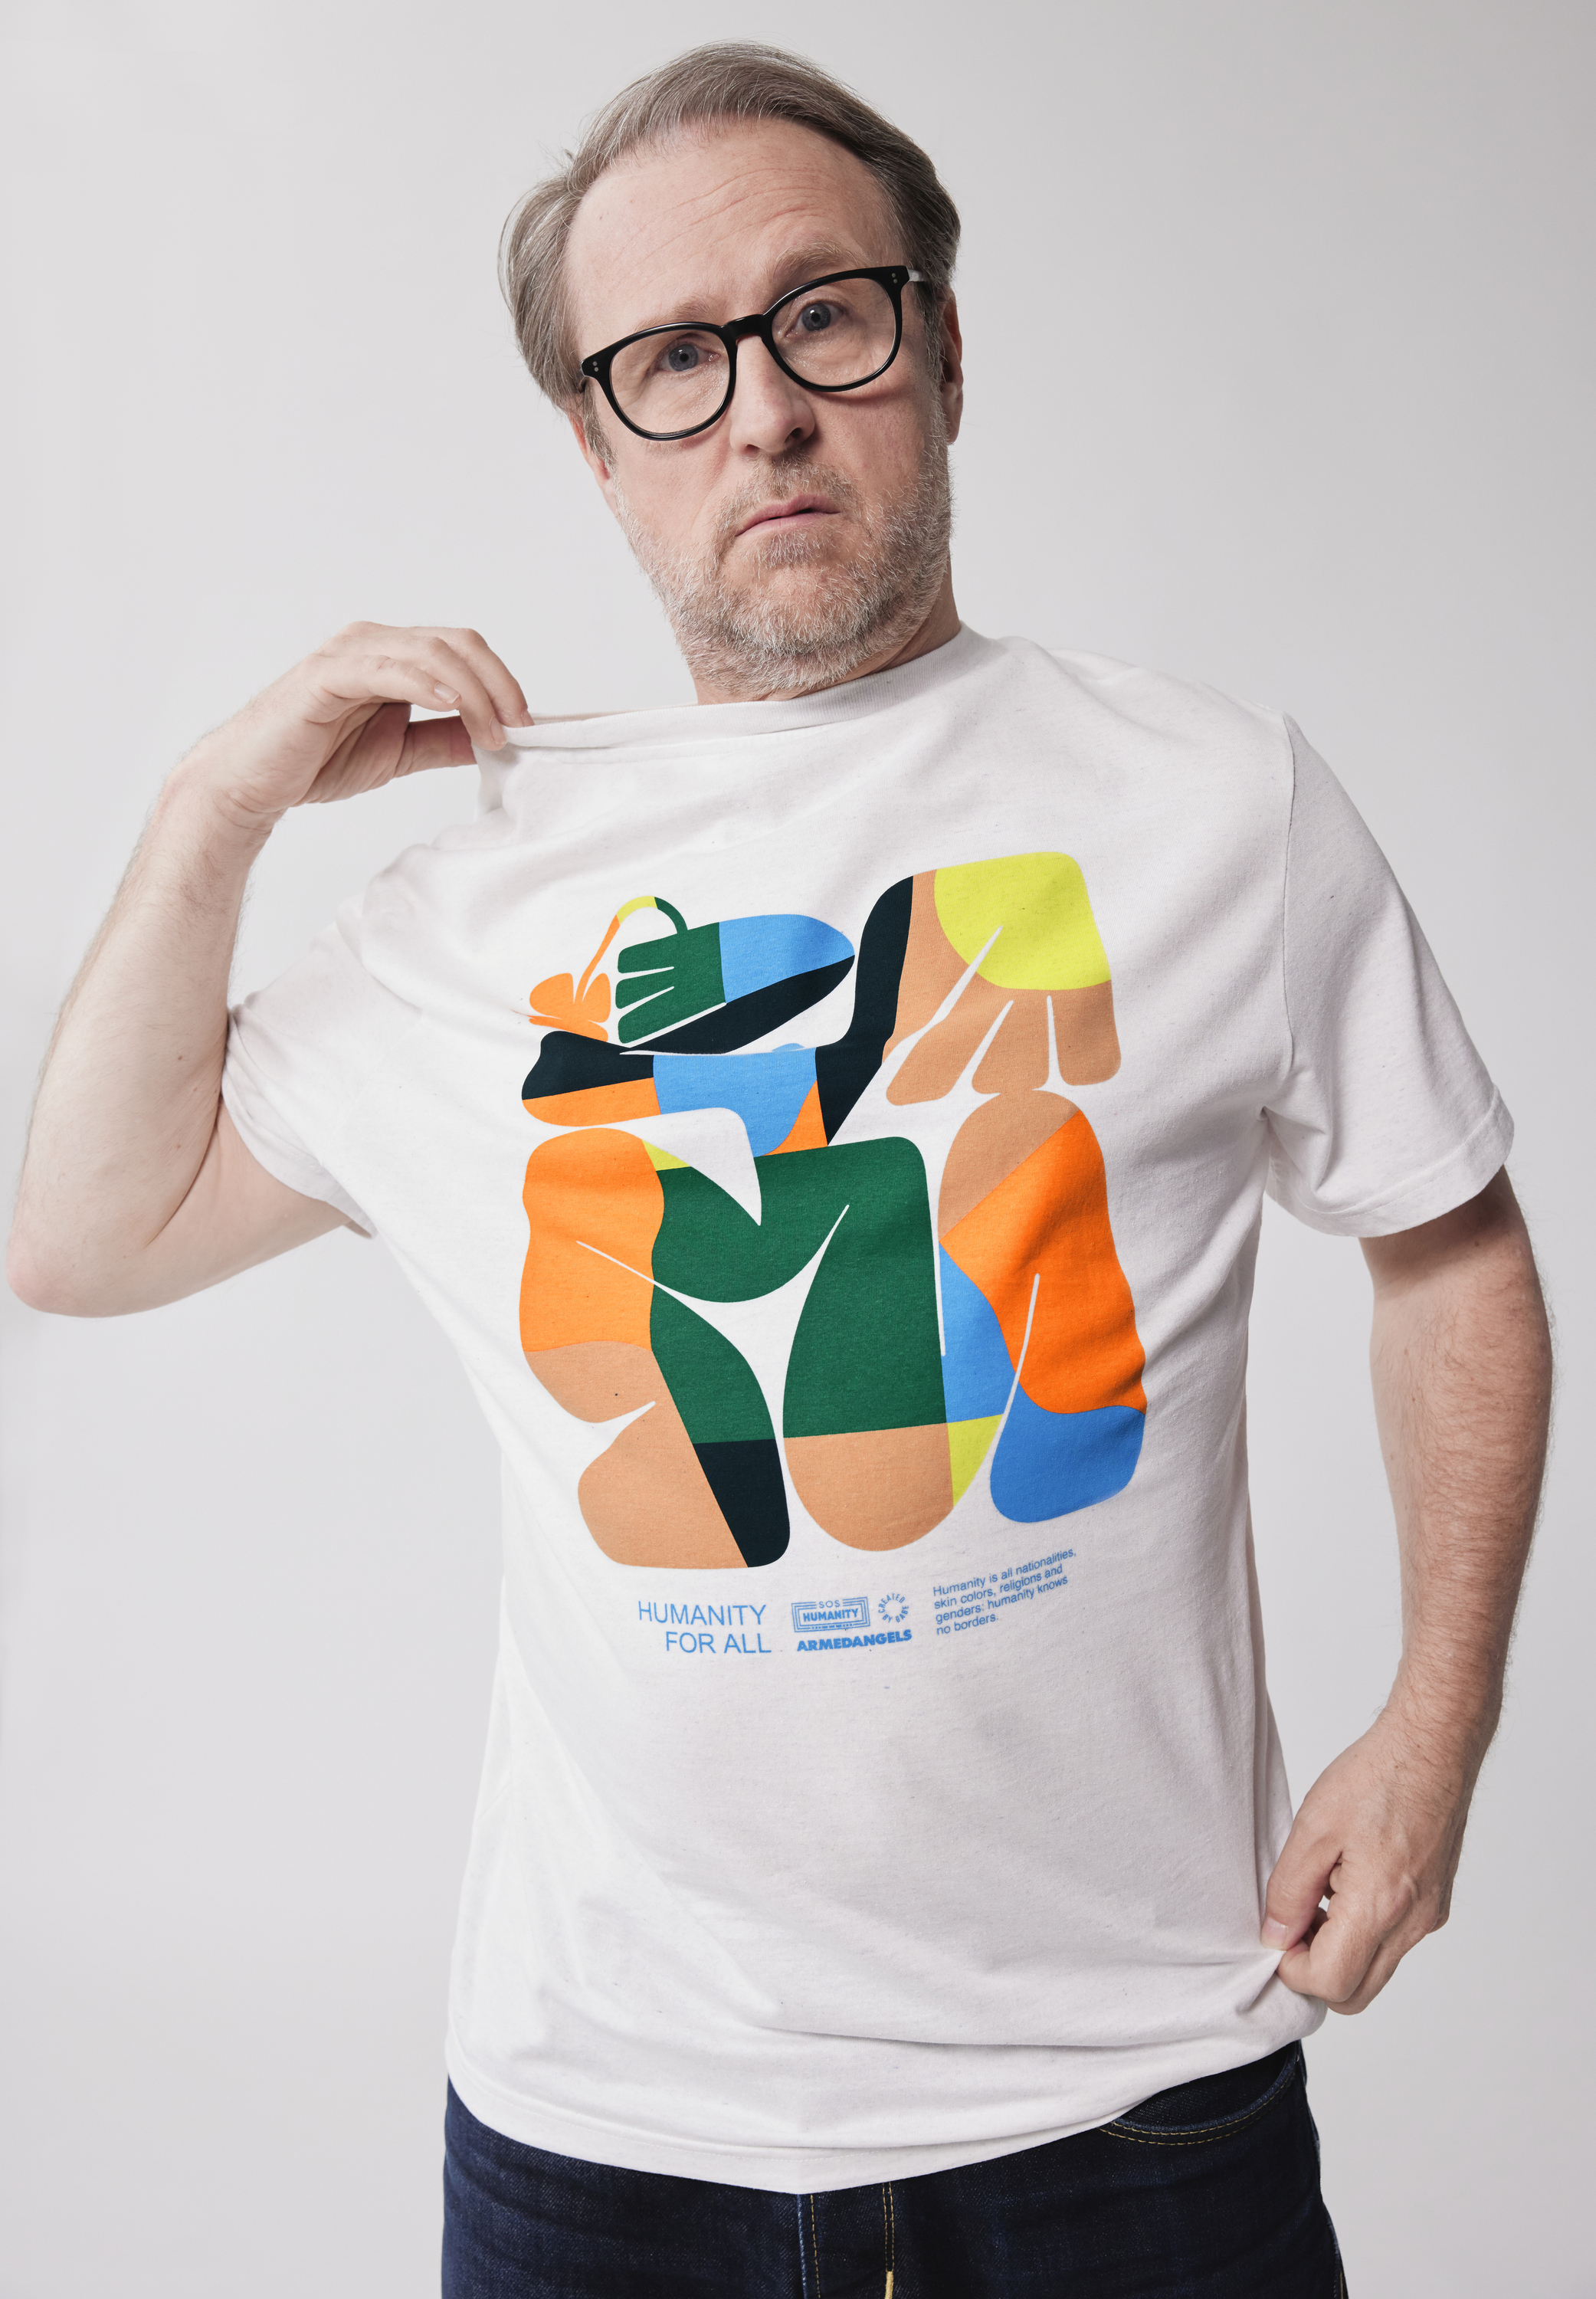 AADO CLIMATE JUSTICE T-Shirt aus recycelter Baumwolle Tencel™ Mix